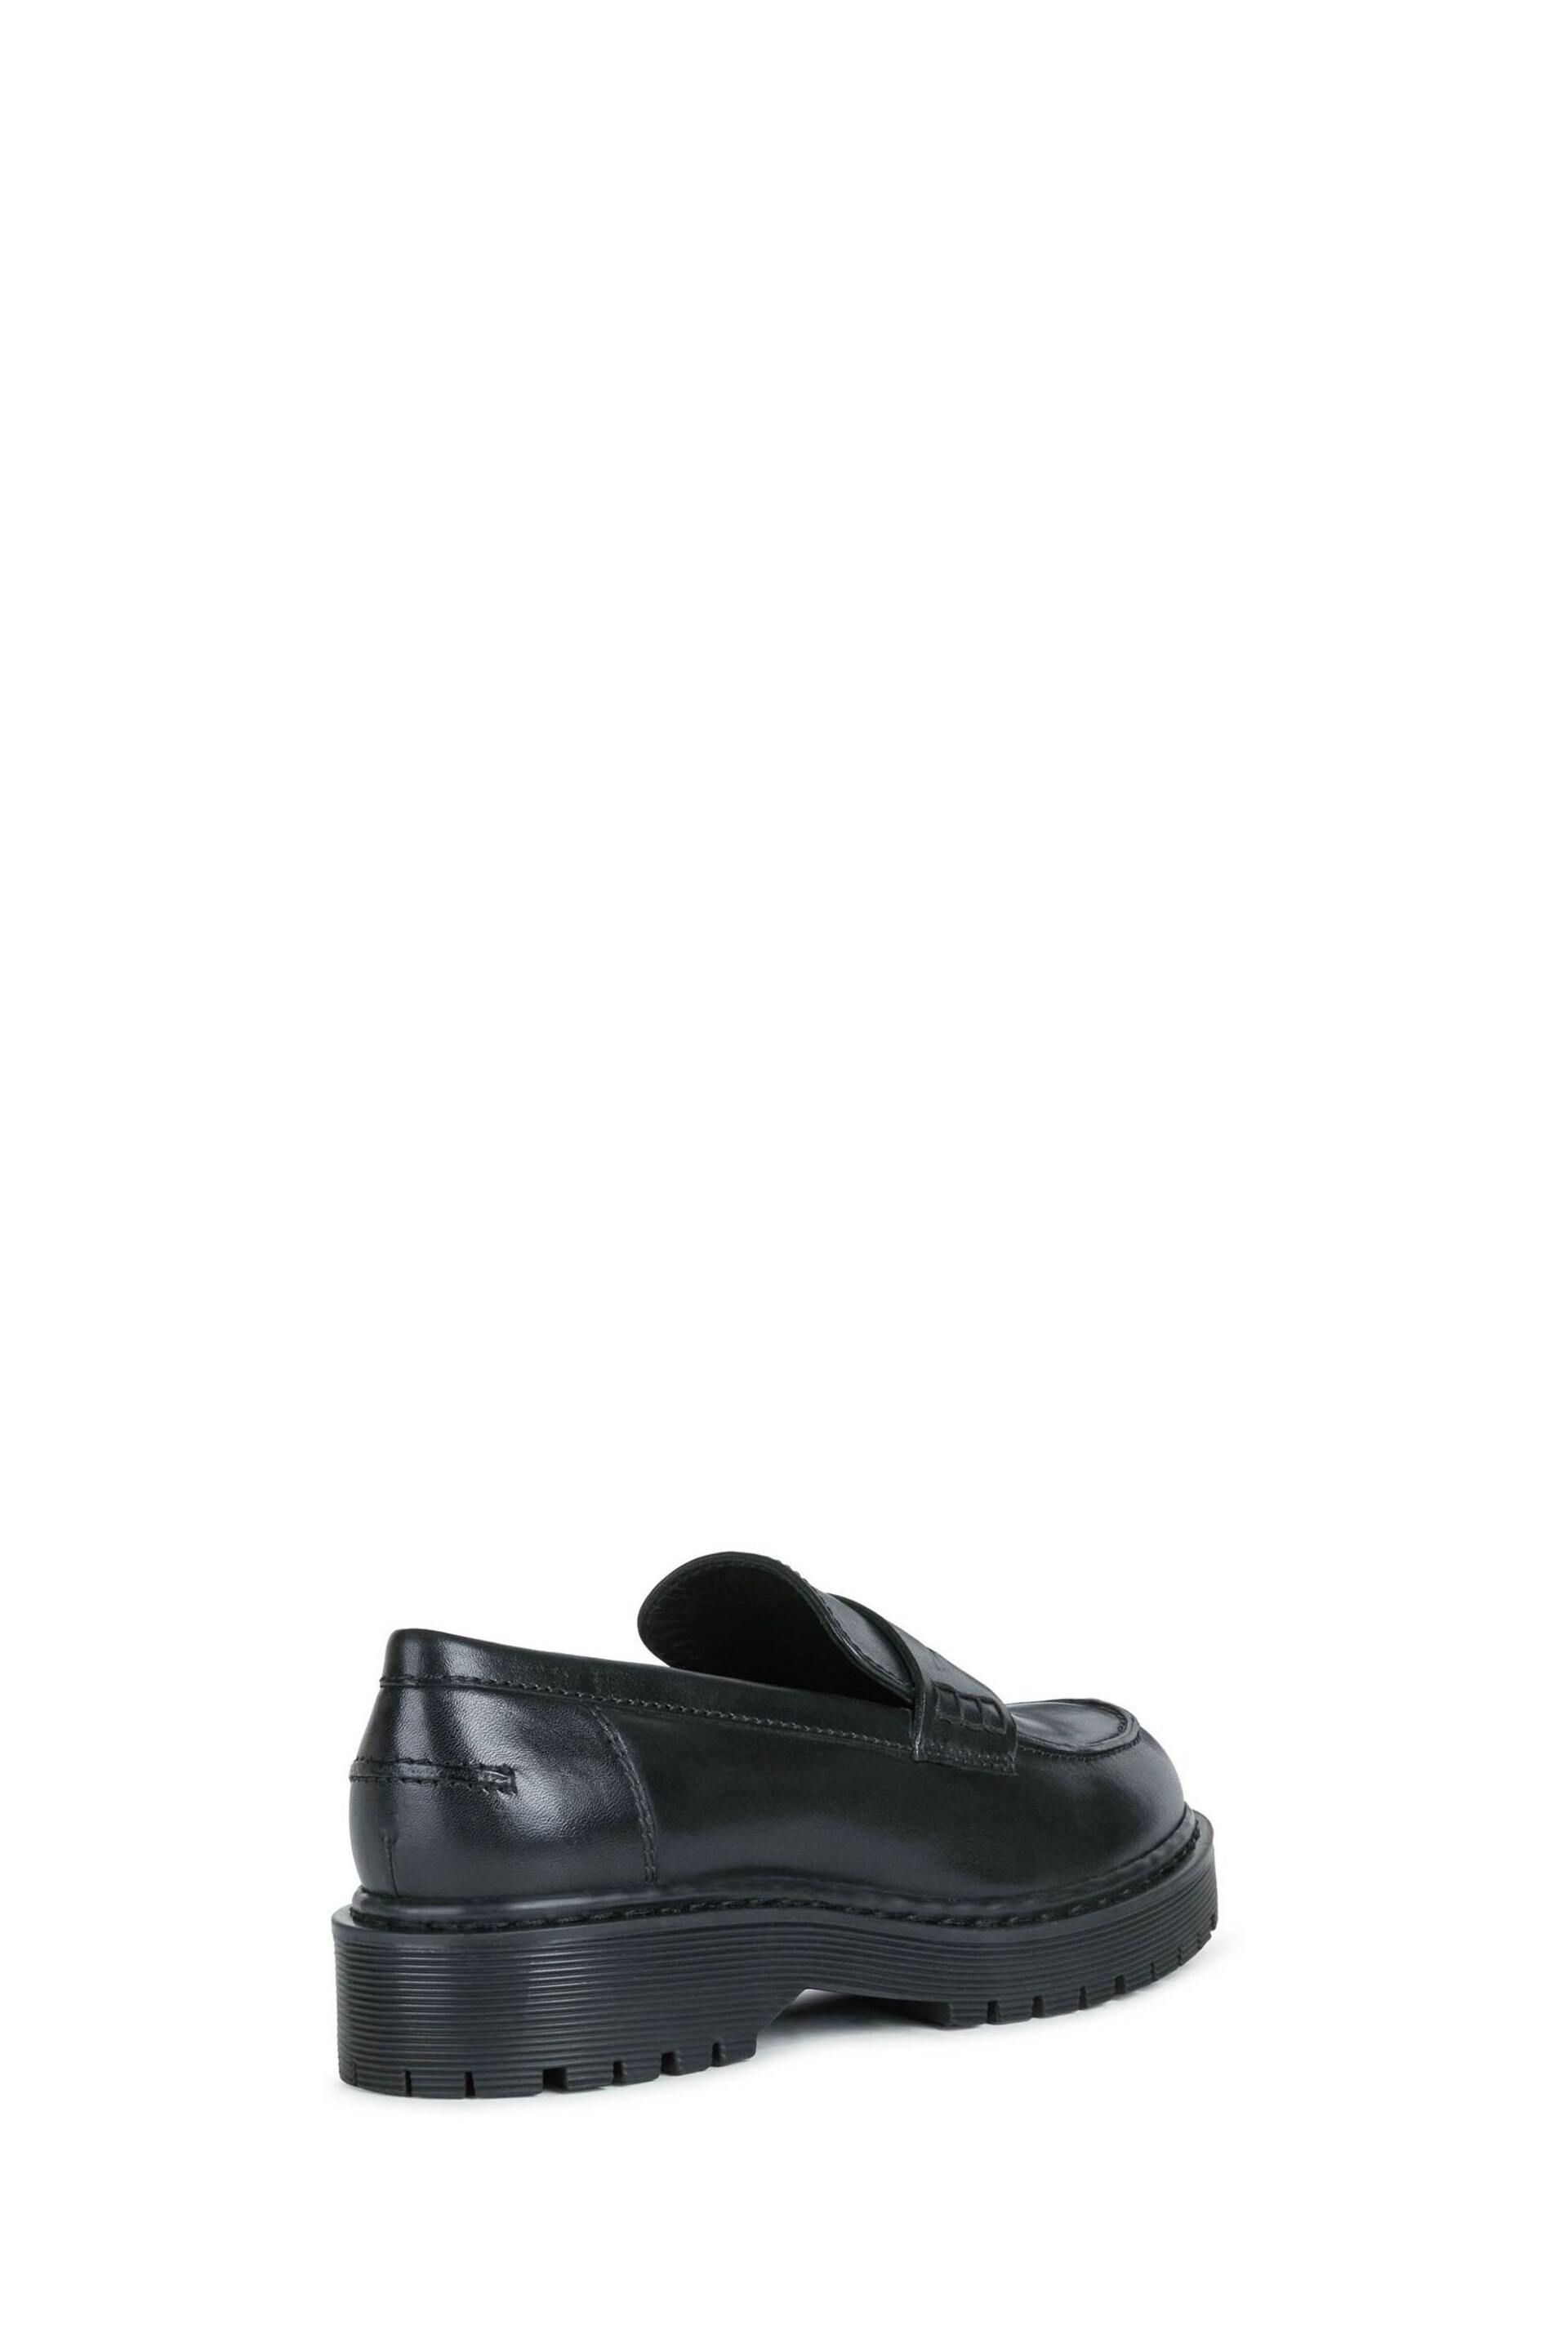 Geox Womens Bleyze Black Shoes - Image 3 of 6